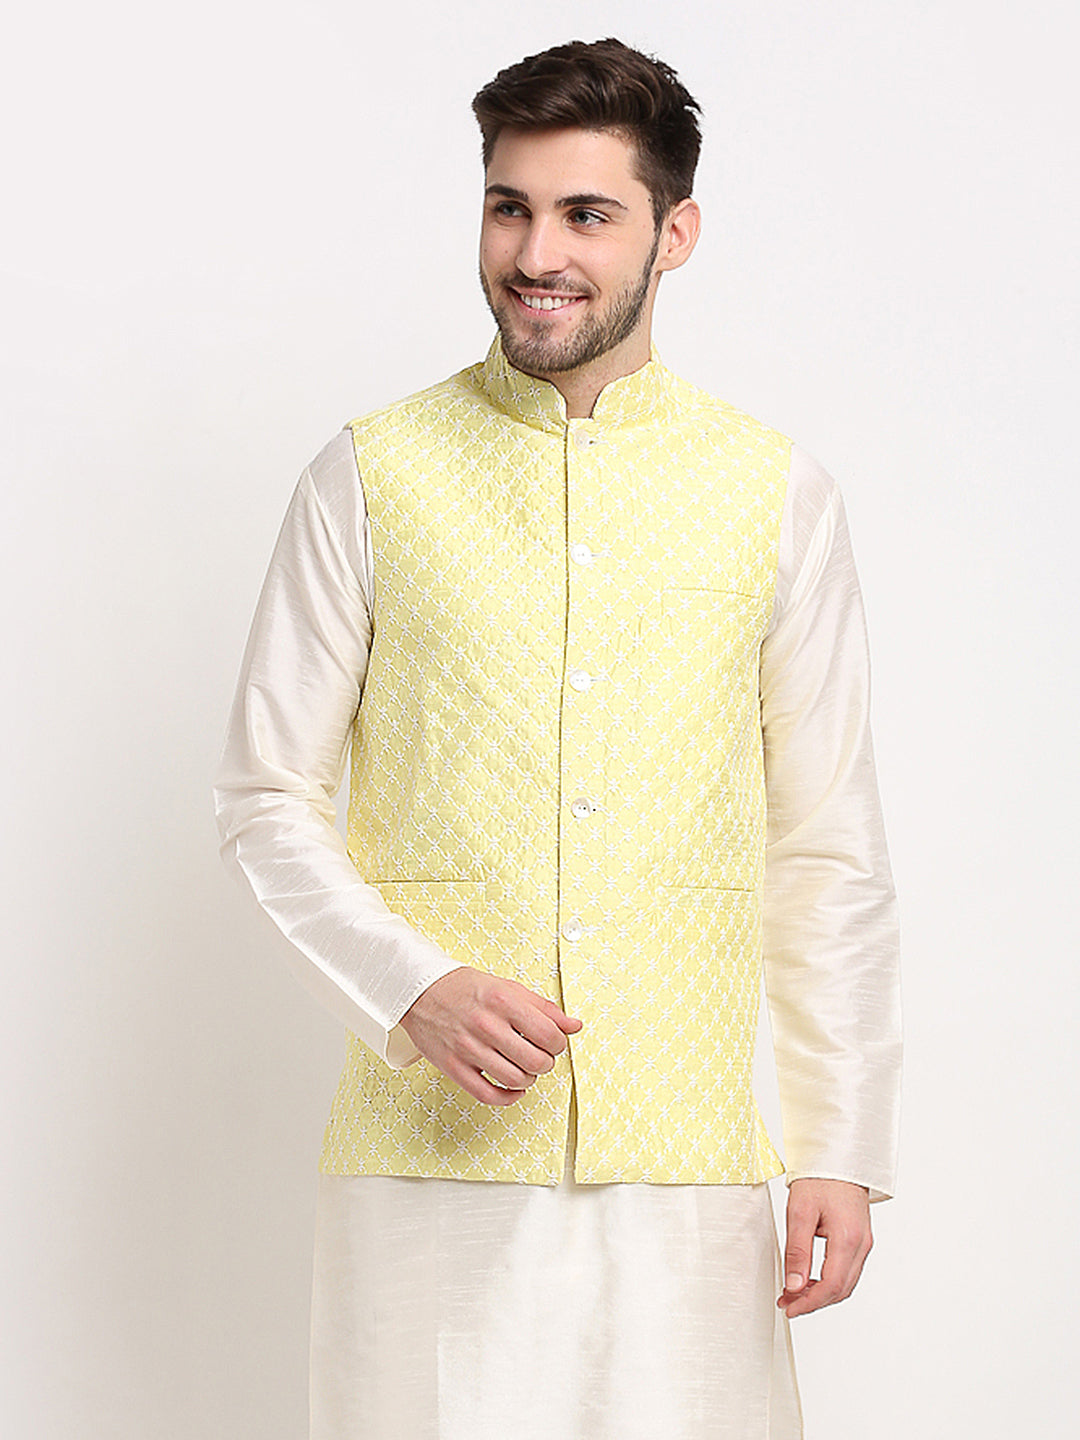 Jompers Men's Yellow Yellow and White Embroidered Nehru Jacket